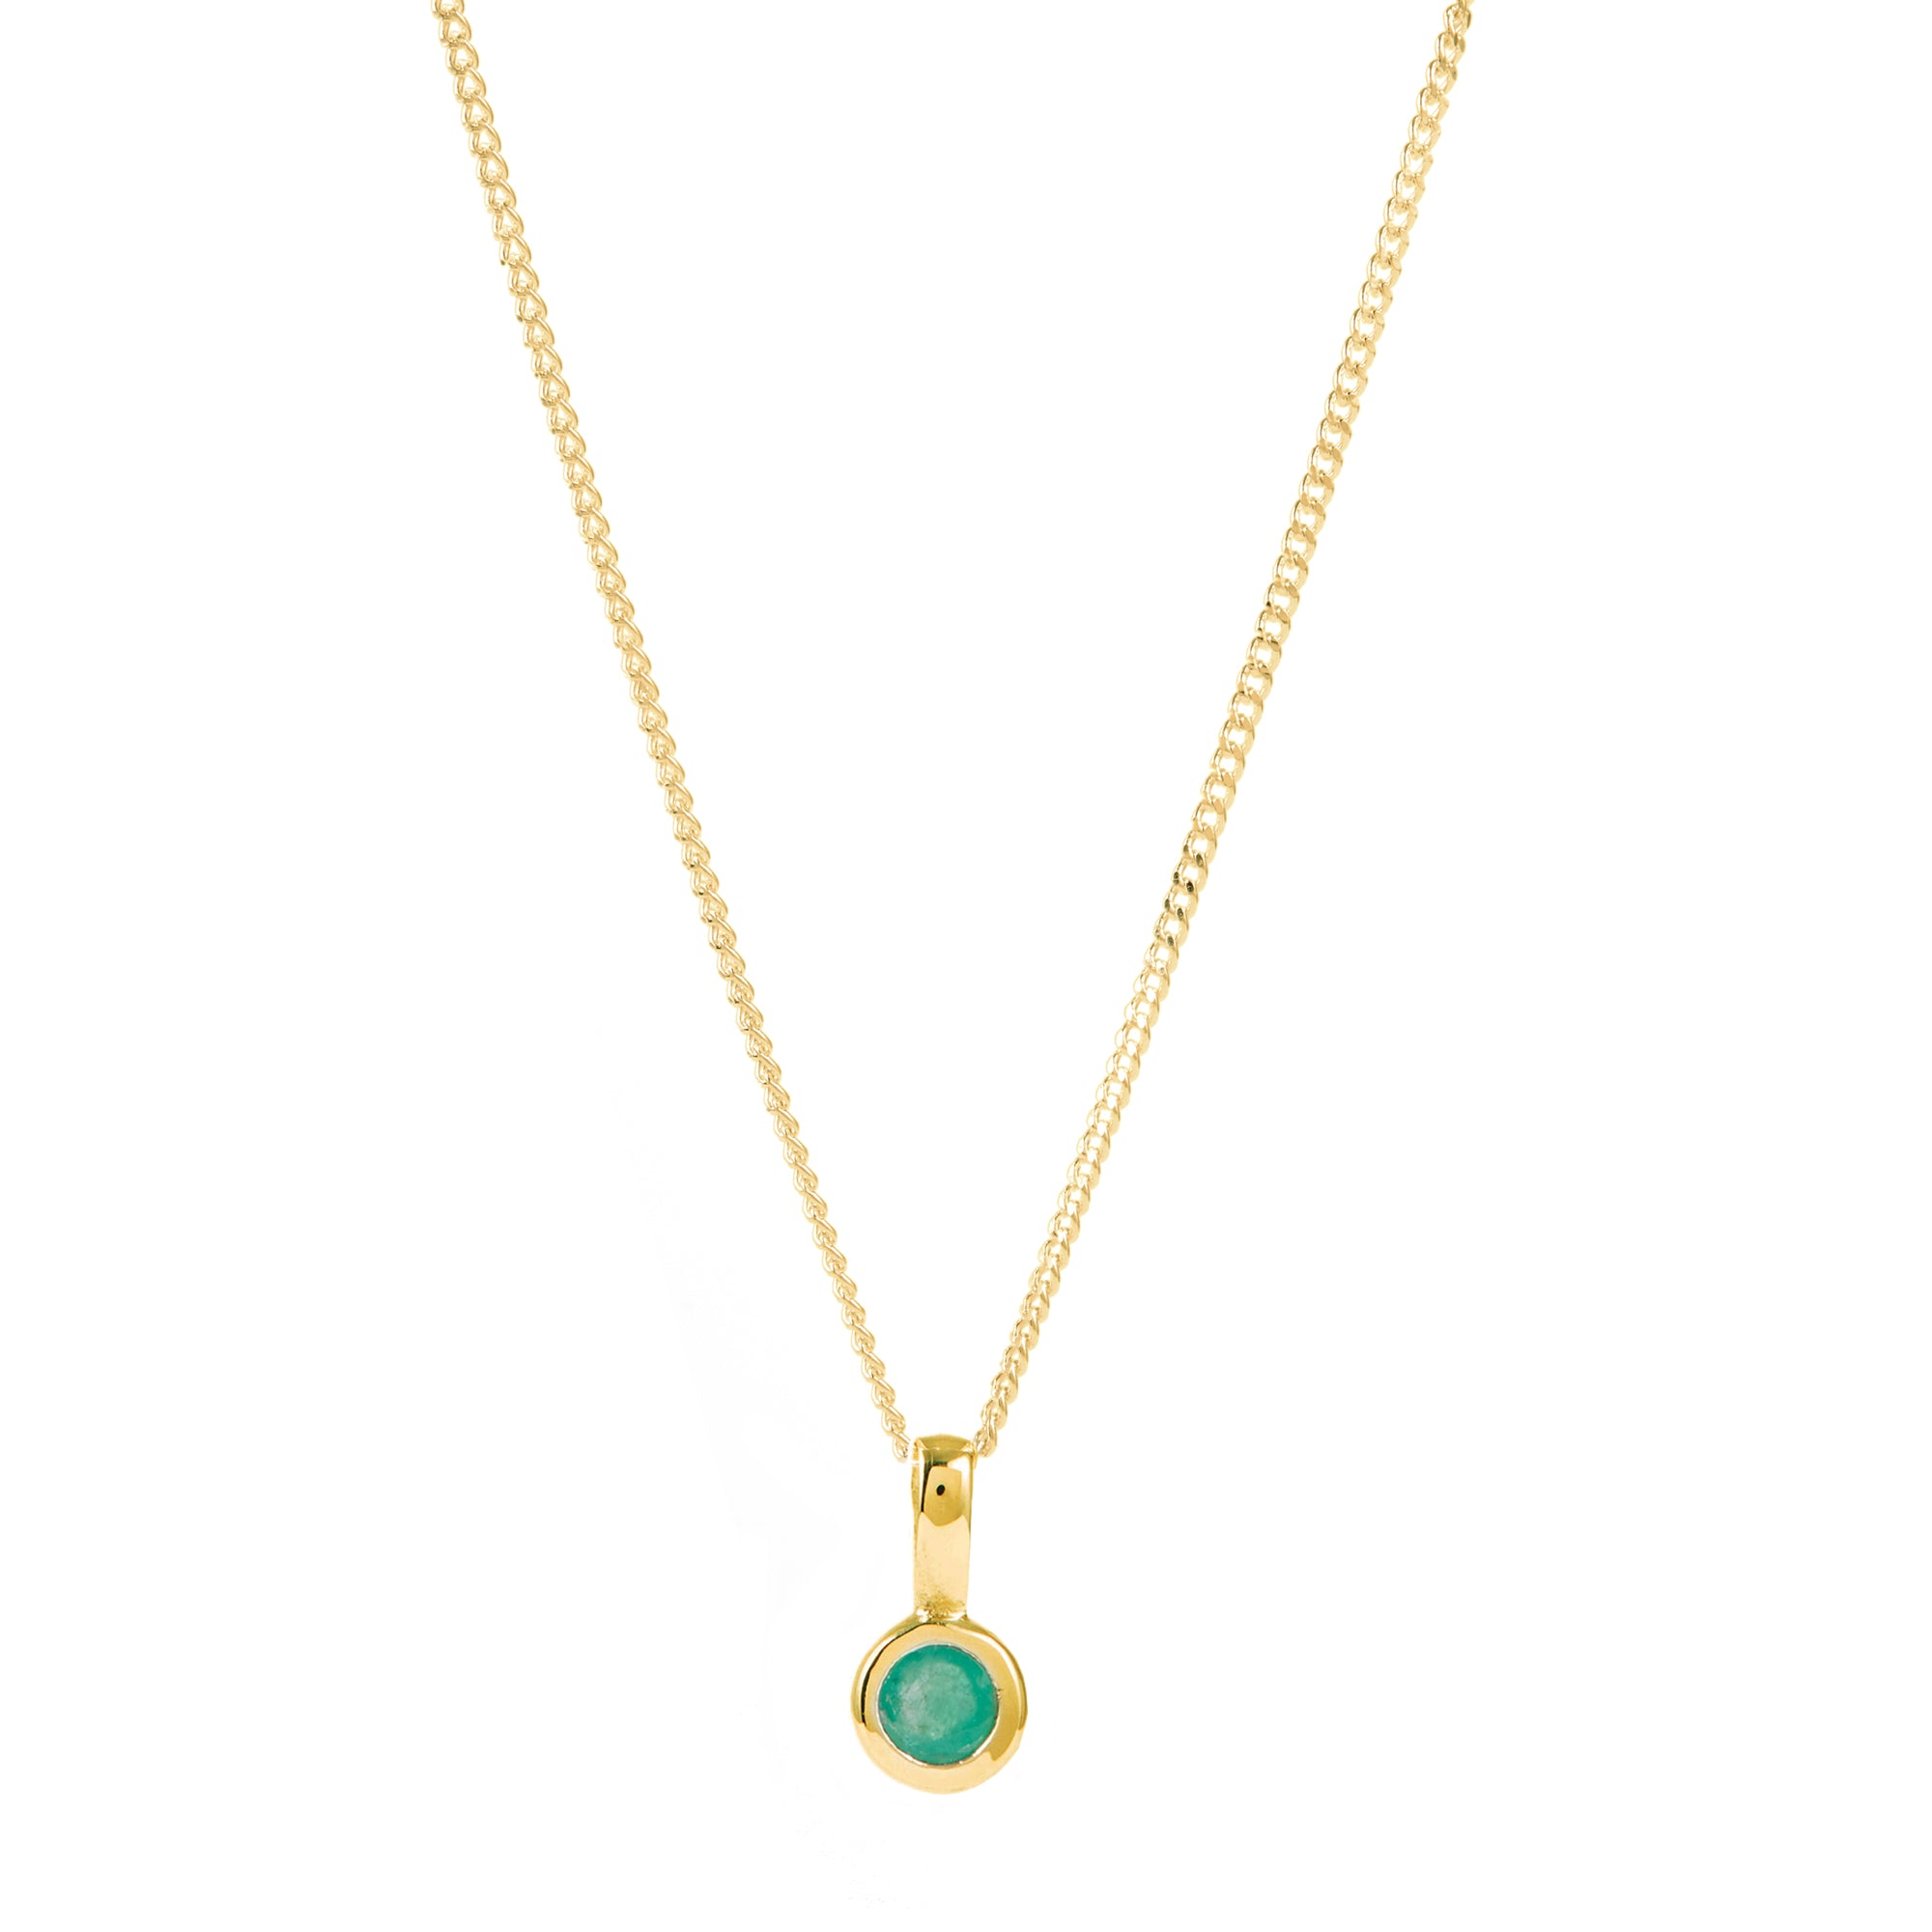 May Birthstone Charm Necklace - Emerald